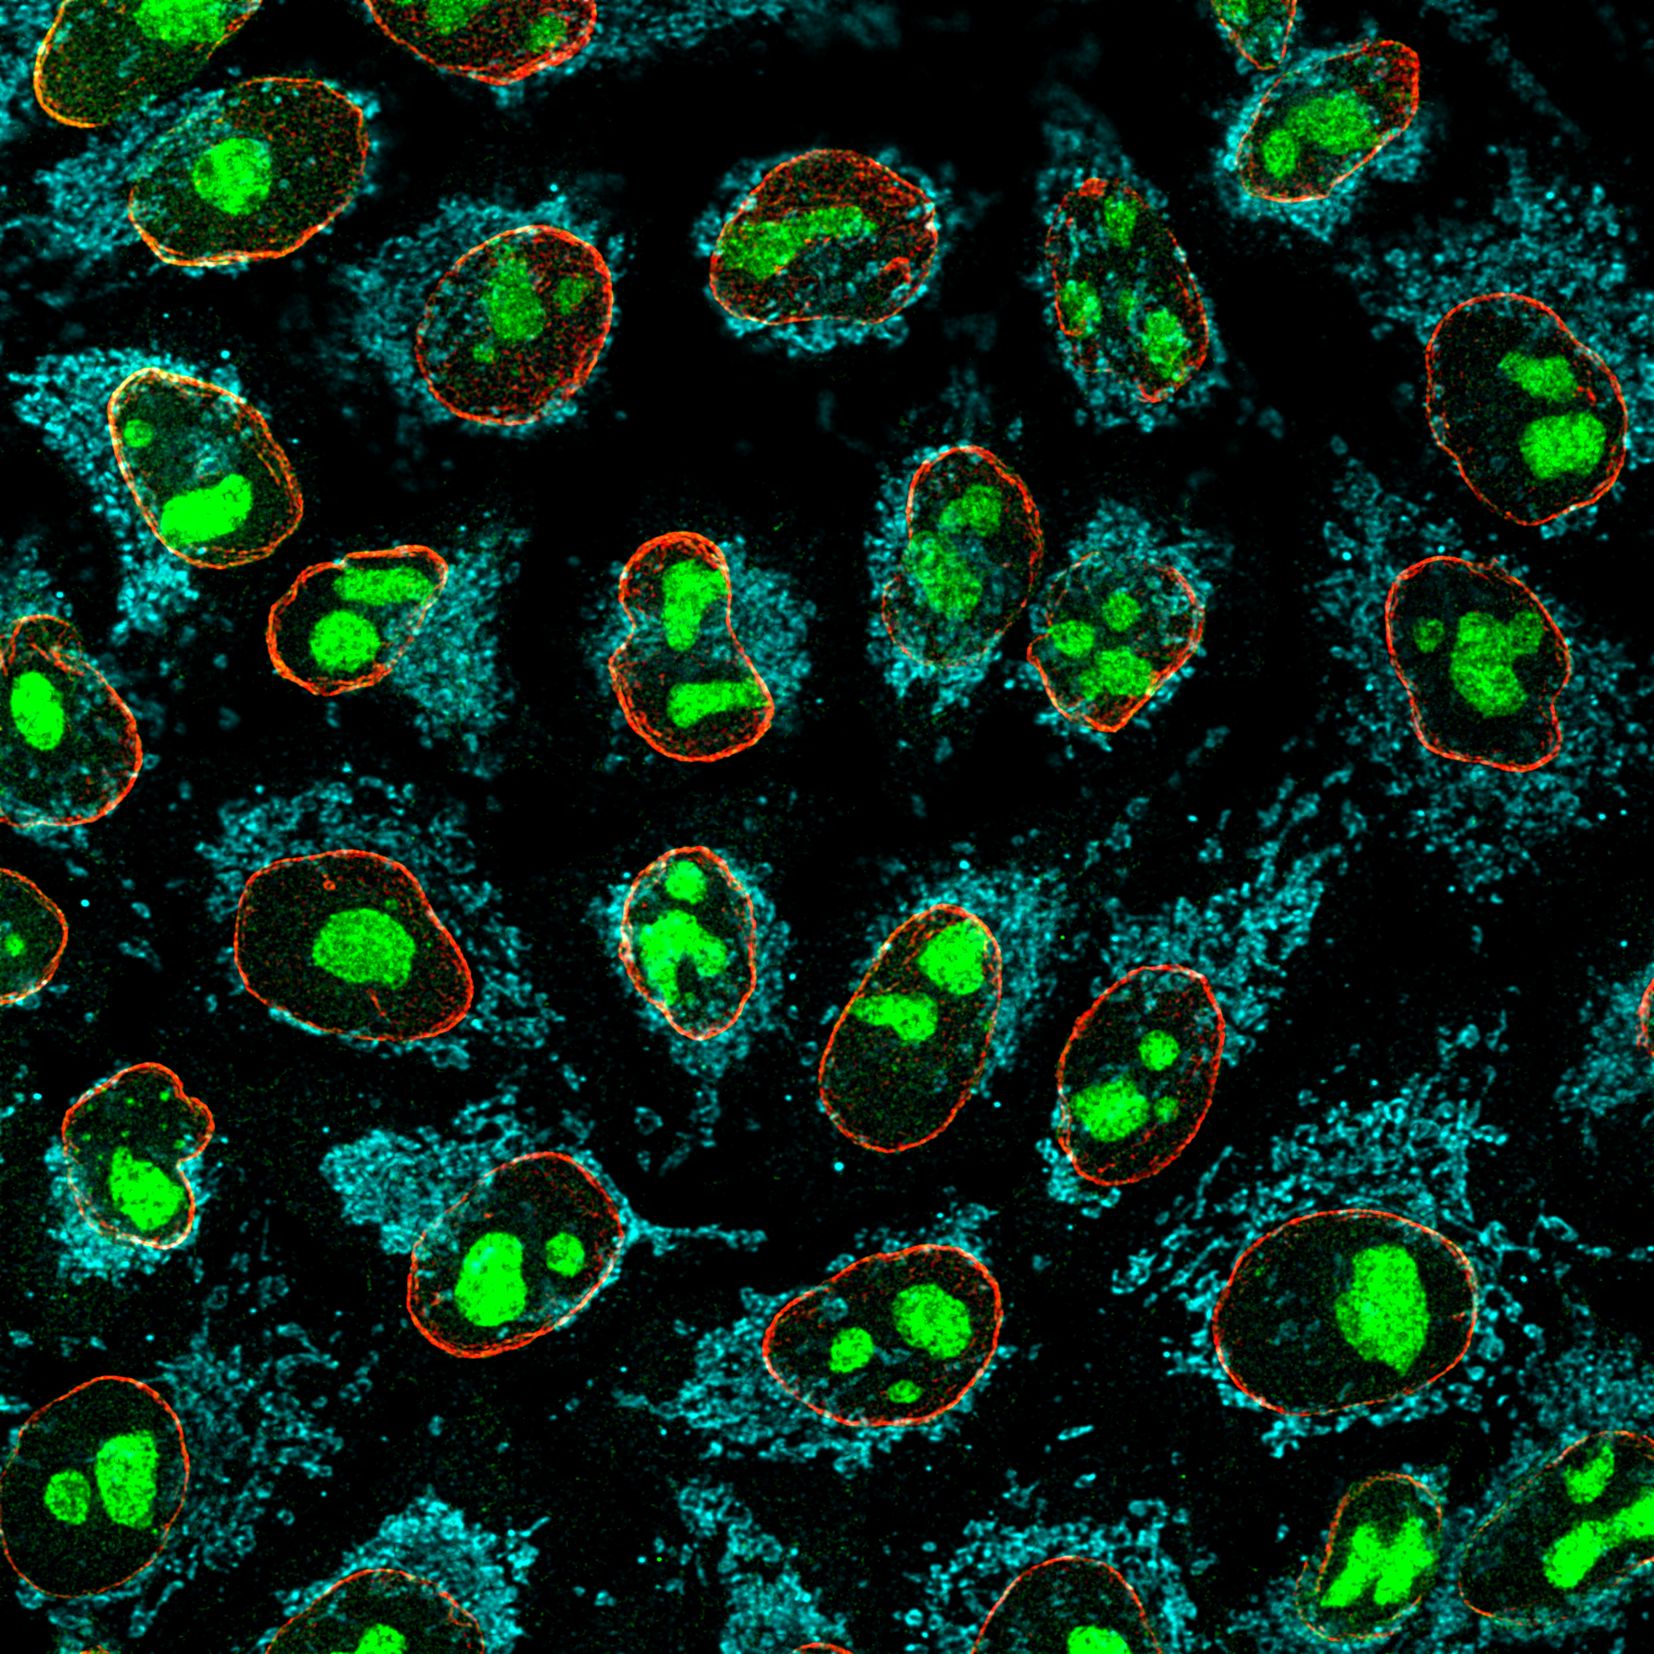 Immunofluorescence of HeLa: PFA-fixed HeLa cells were stained with anti-GNL3 (67169-1-Ig) labeled with FlexAble CoraLite® Plus 488 Kit (KFA041, green), mouse anti-Lamin and anti-mouse IgG secondary antibody Alexa Fluor® 568 (red), rabbit anti-COXIV (11242-1-AP) and anti-rabbit IgG secondary antibody Alexa Fluor® 647 (cyan) and DAPI (blue).
Confocal images were acquired with a 100x oil objective and post-processed. Images were recorded at the Core Facility Bioimaging at the Biomedical Center, LMU Munich.